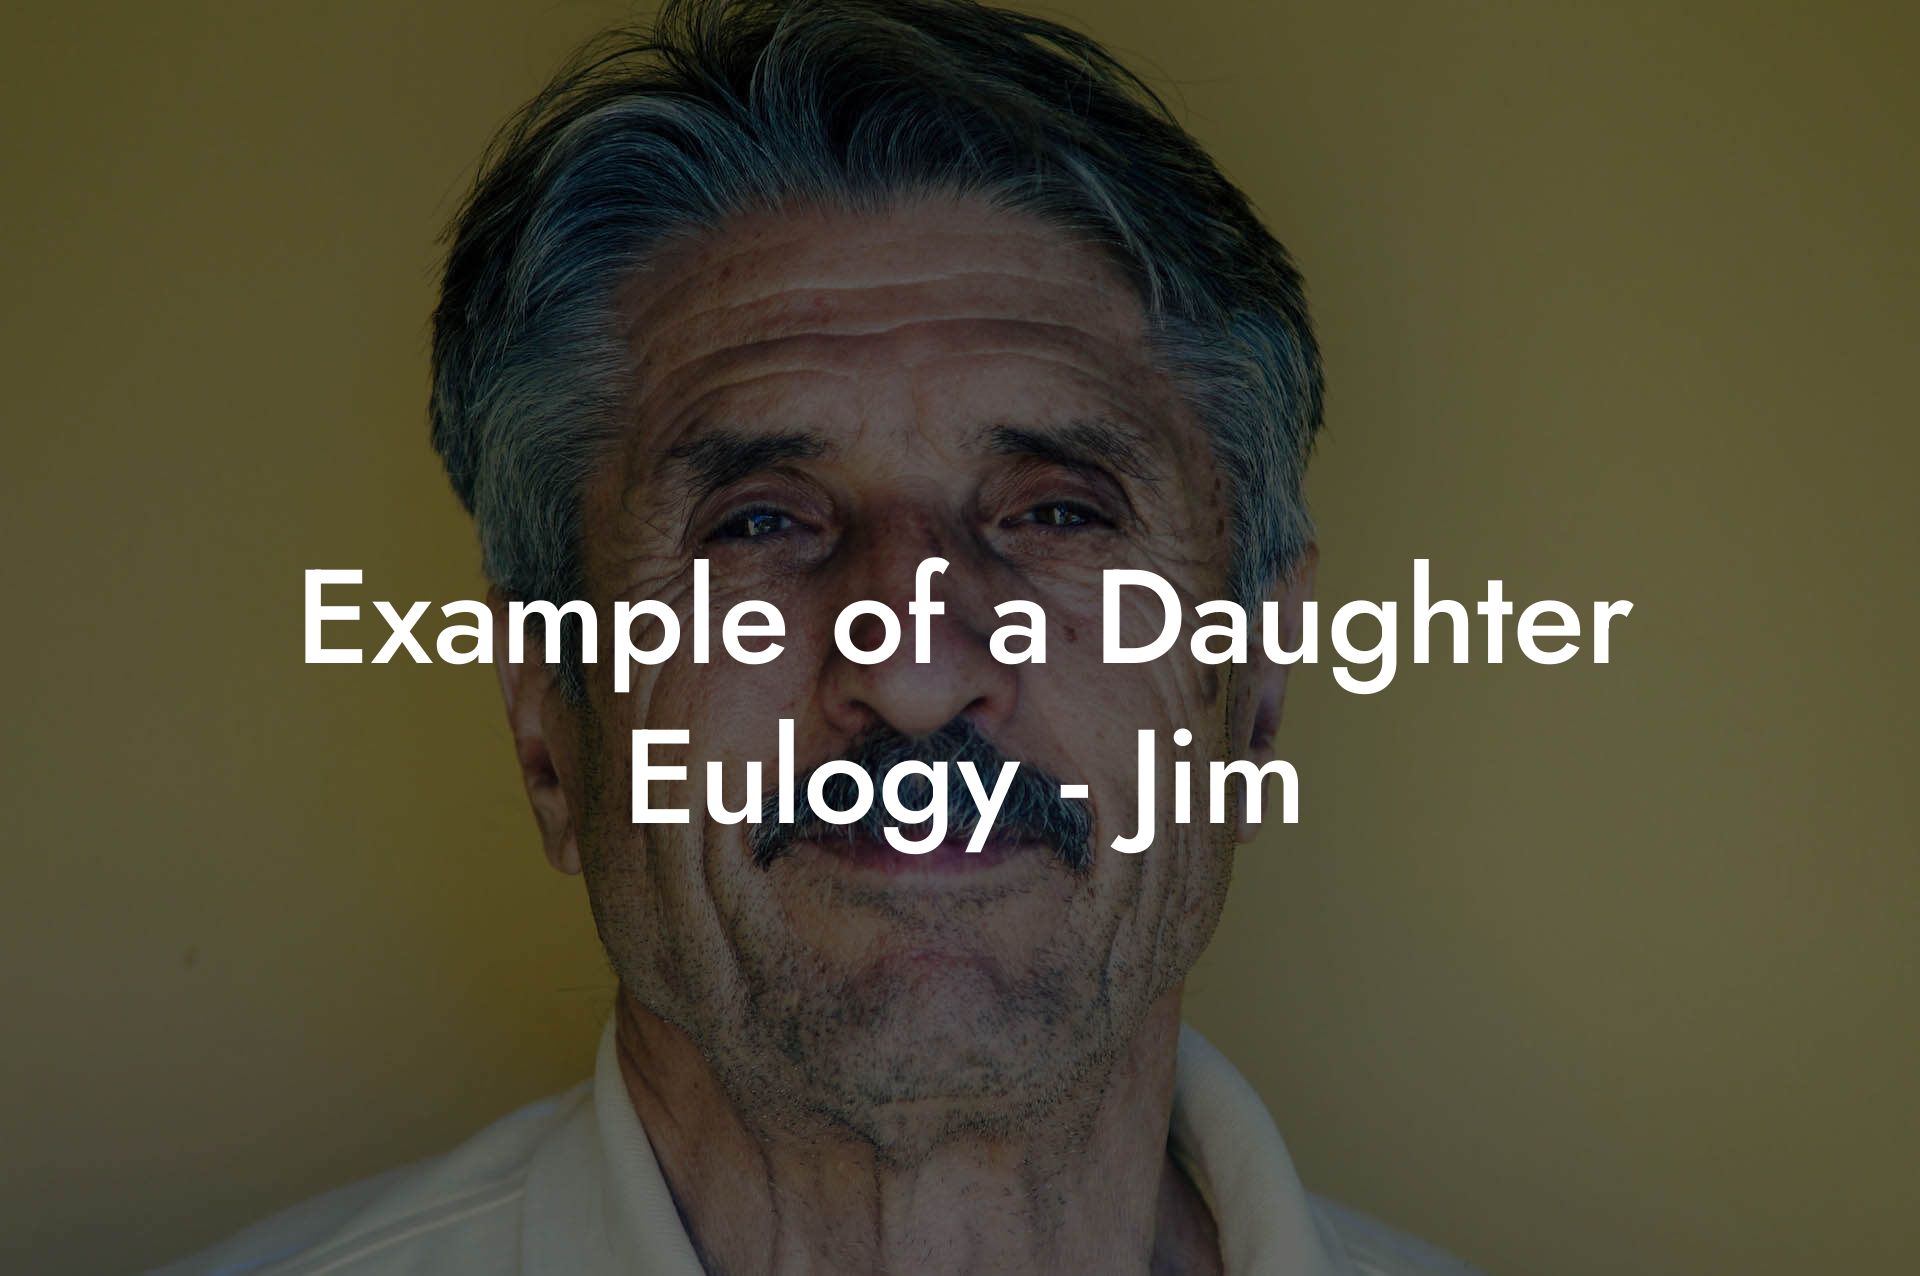 Example of a Daughter Eulogy - Jim